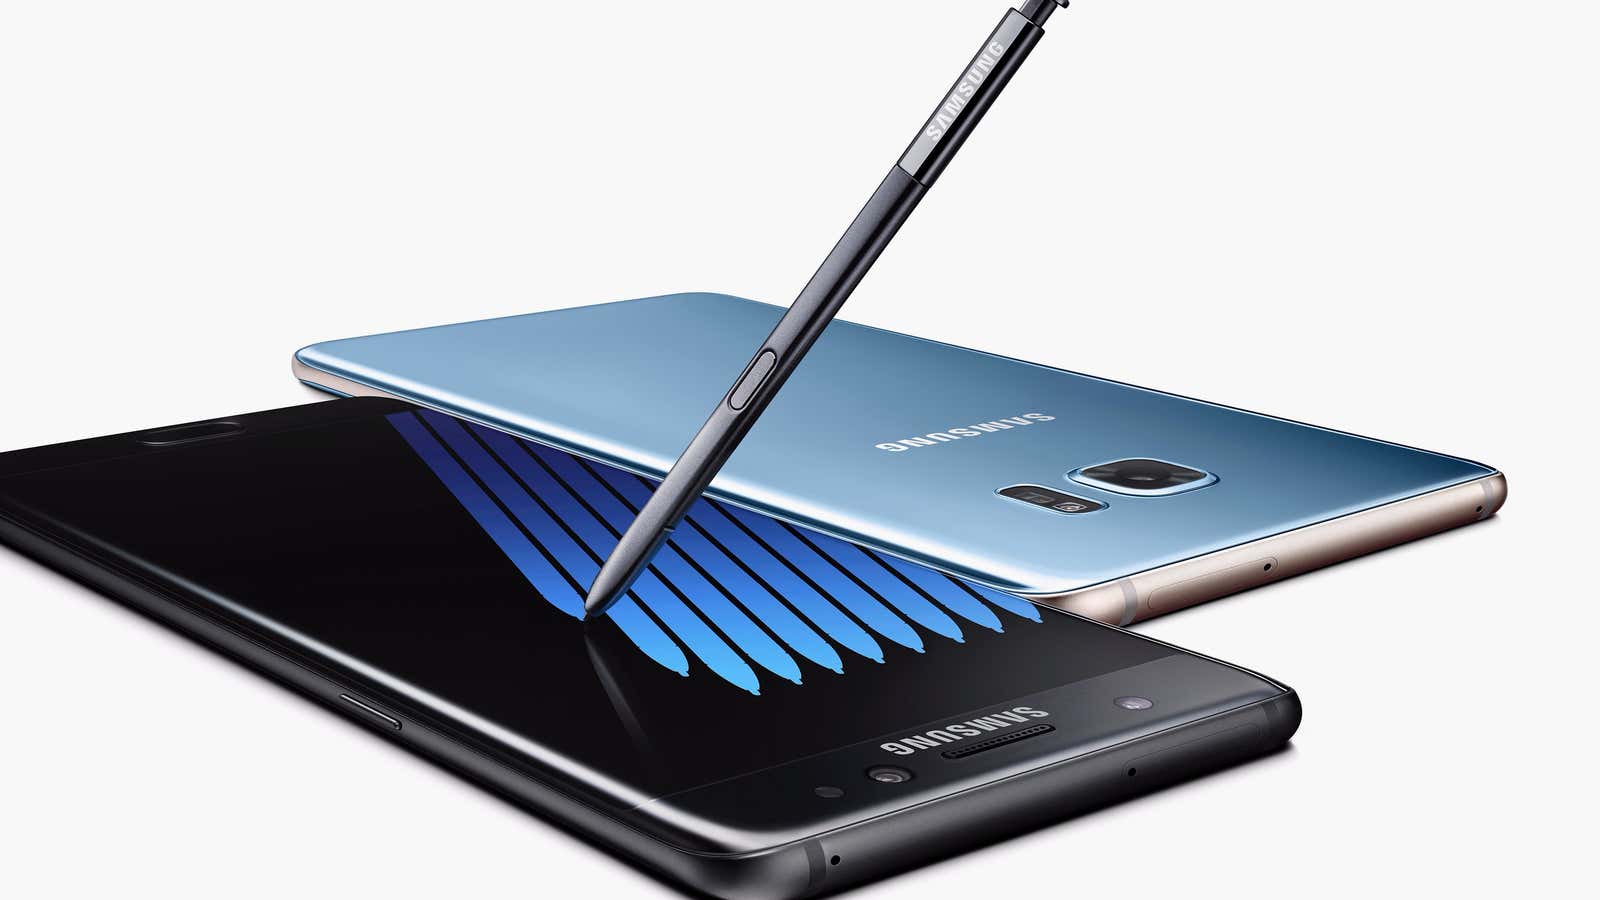 The Samsung Galaxy Note 7.